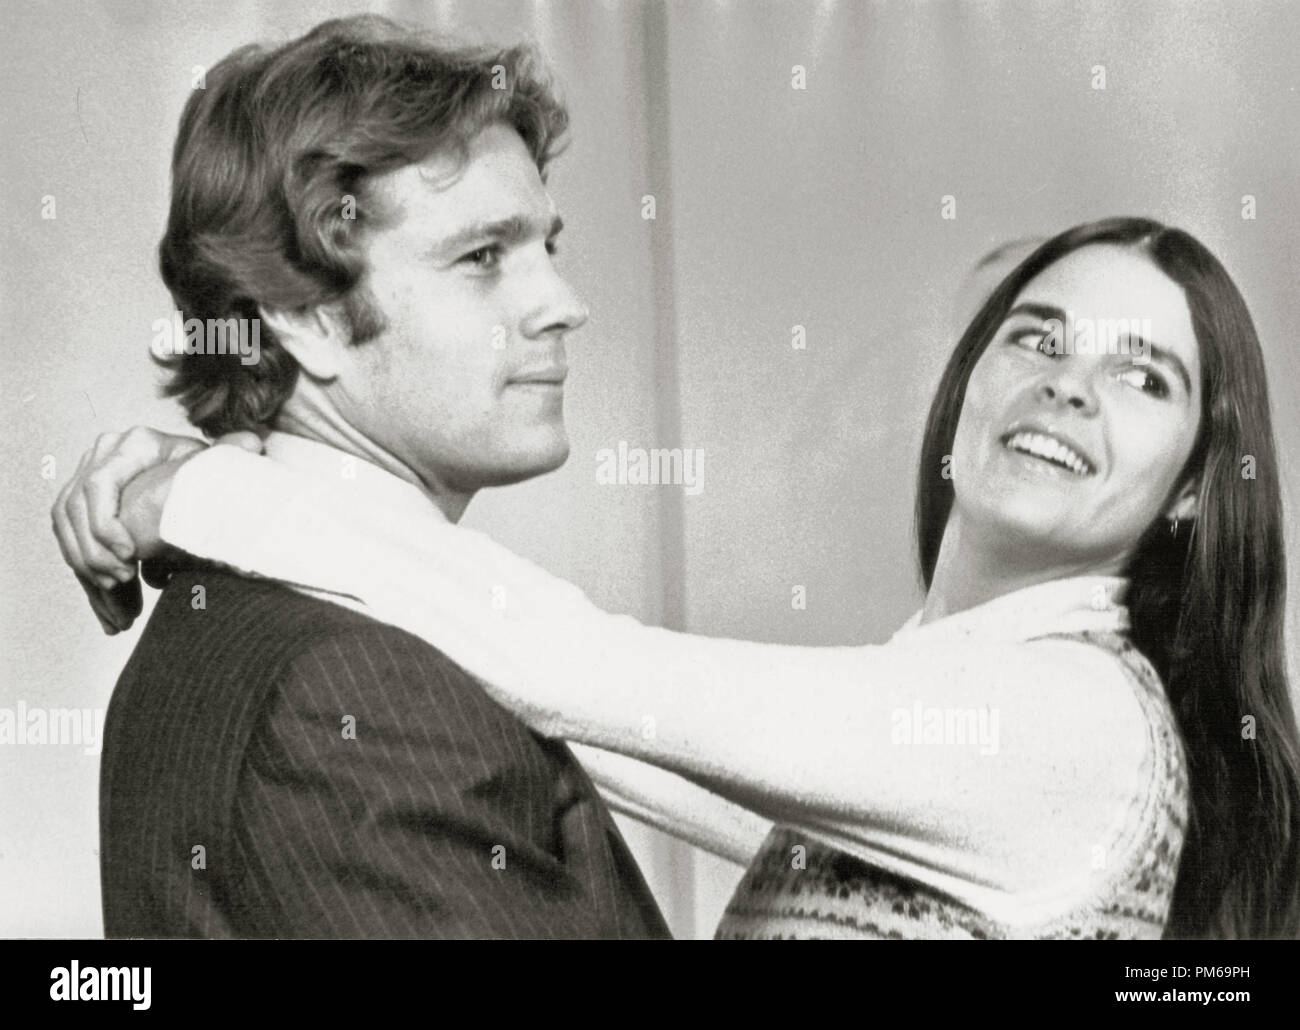 Ryan O'Neal and Ali MacGraw, 'Love Story' 1970 Paramount  File Reference # 31316 374THA Stock Photo